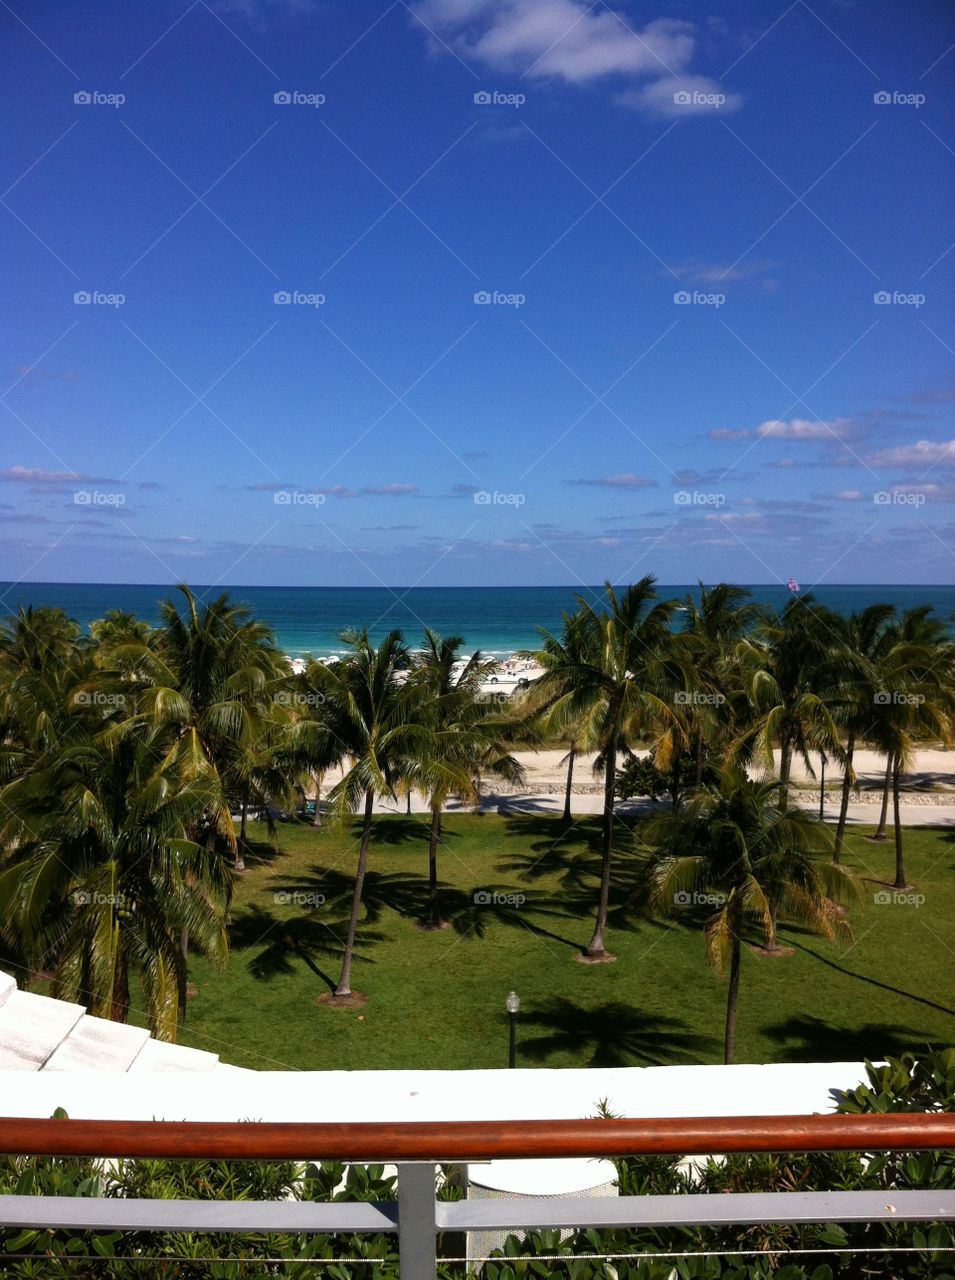 Miami Beach. Taken from top of Betsy Hotel